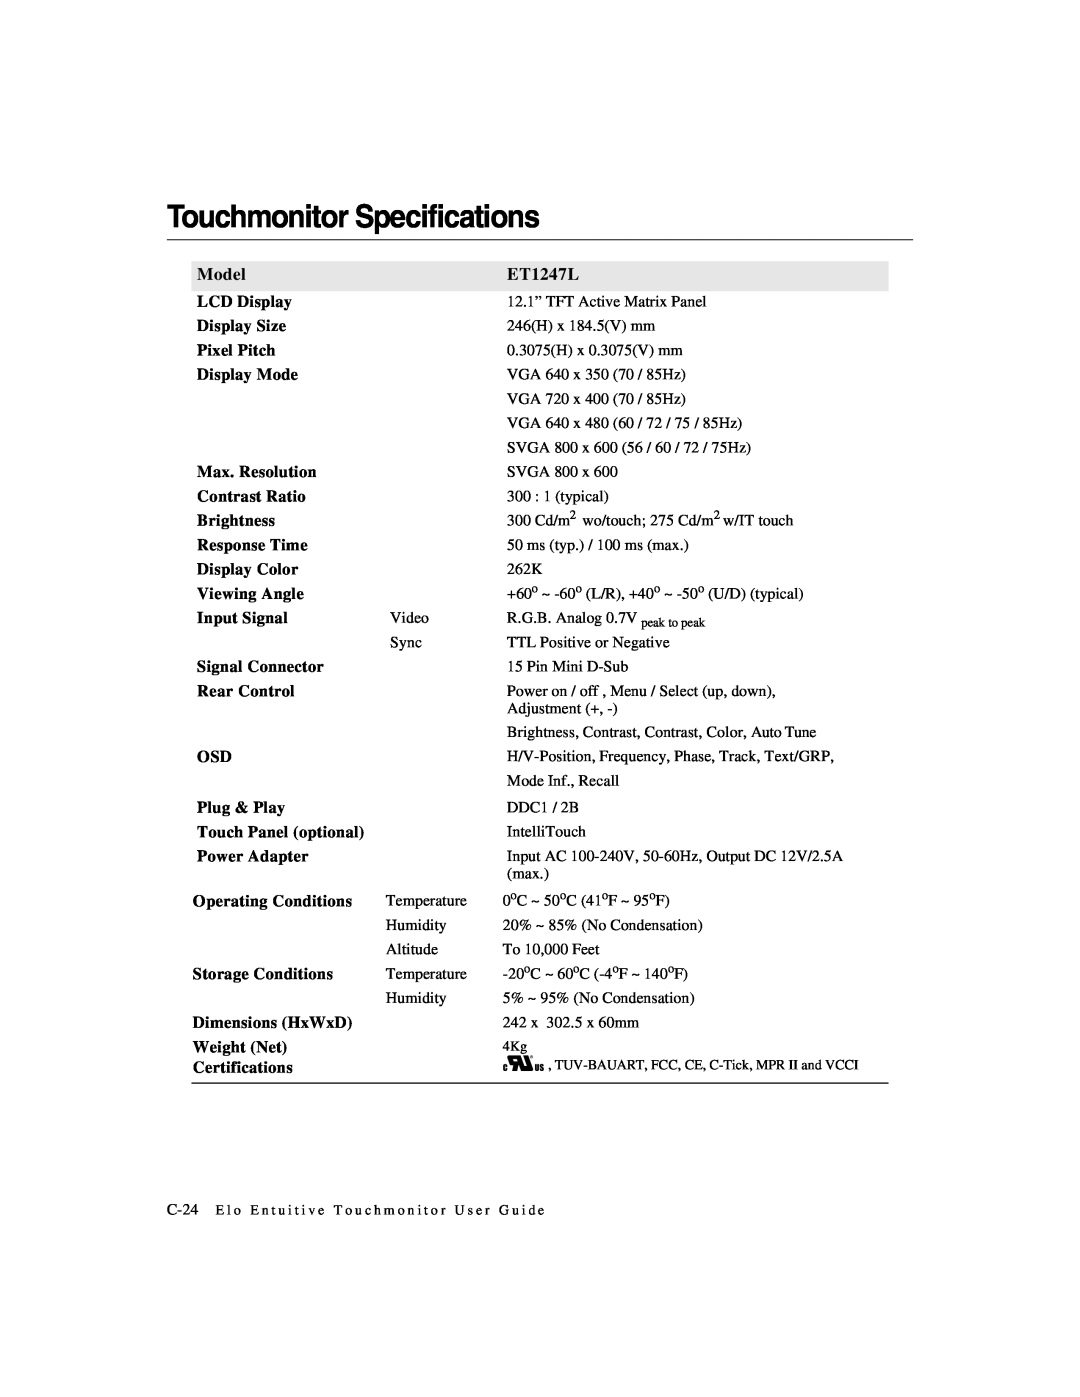 Elo TouchSystems manual Touchmonitor Specifications, Model, ET1247L 